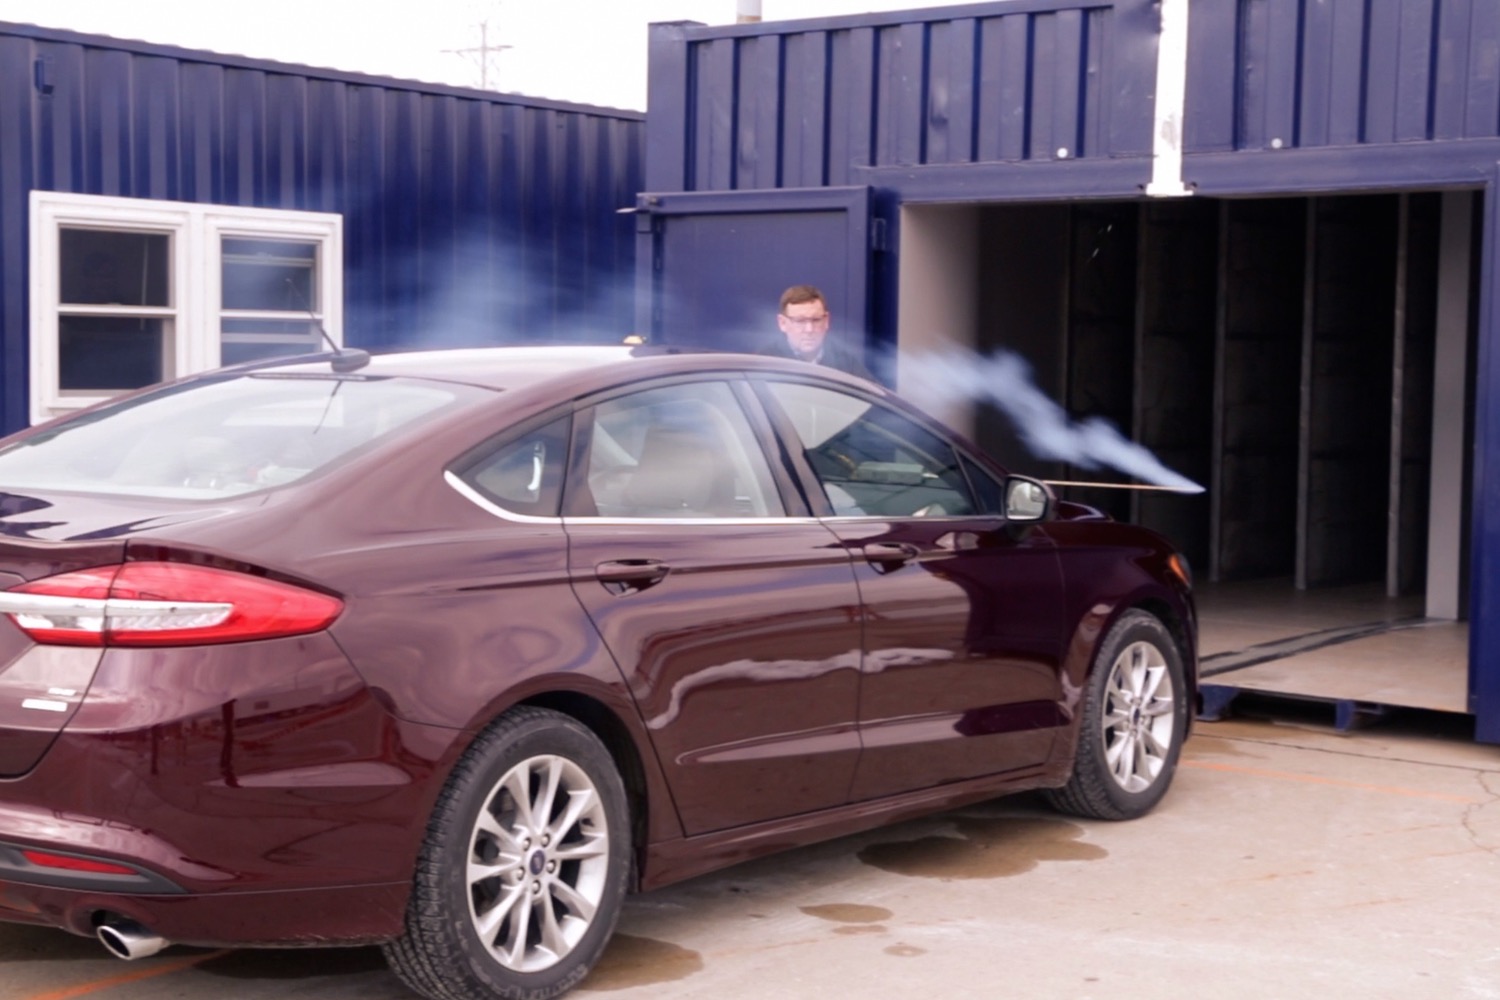 Ford mobile wind tunnel